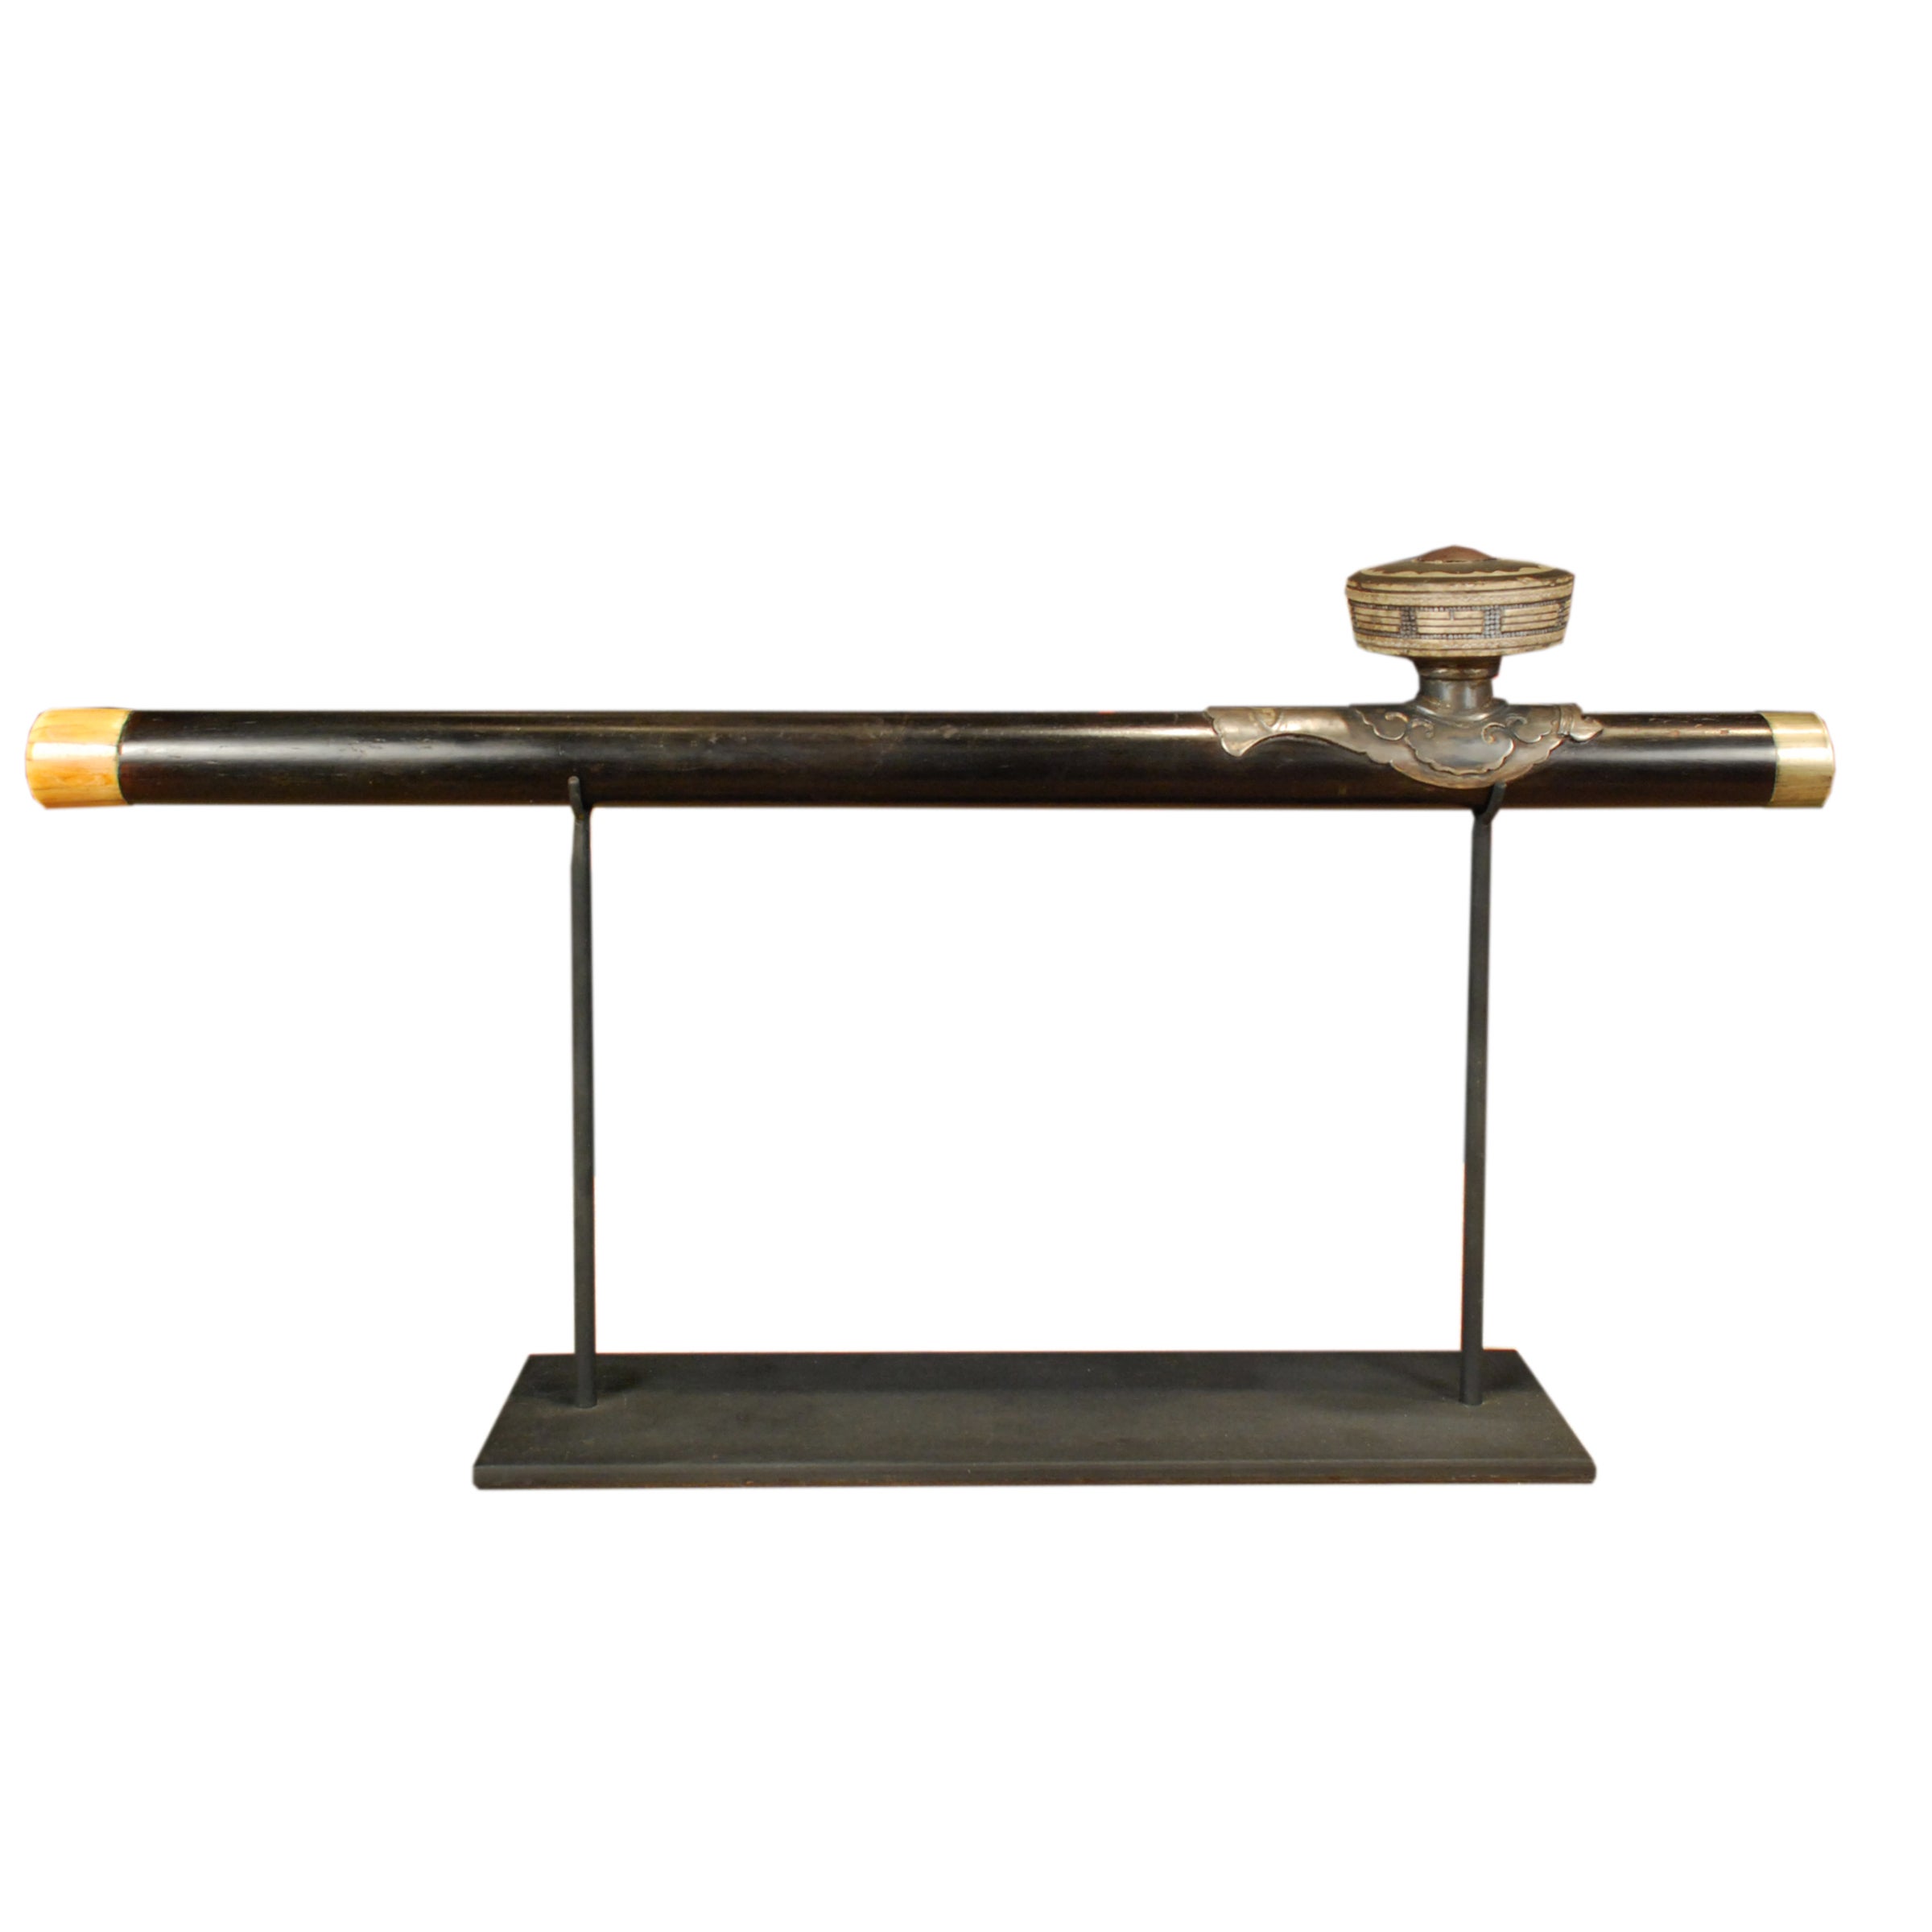 19th Century Chinese Opium Pipe on Stand